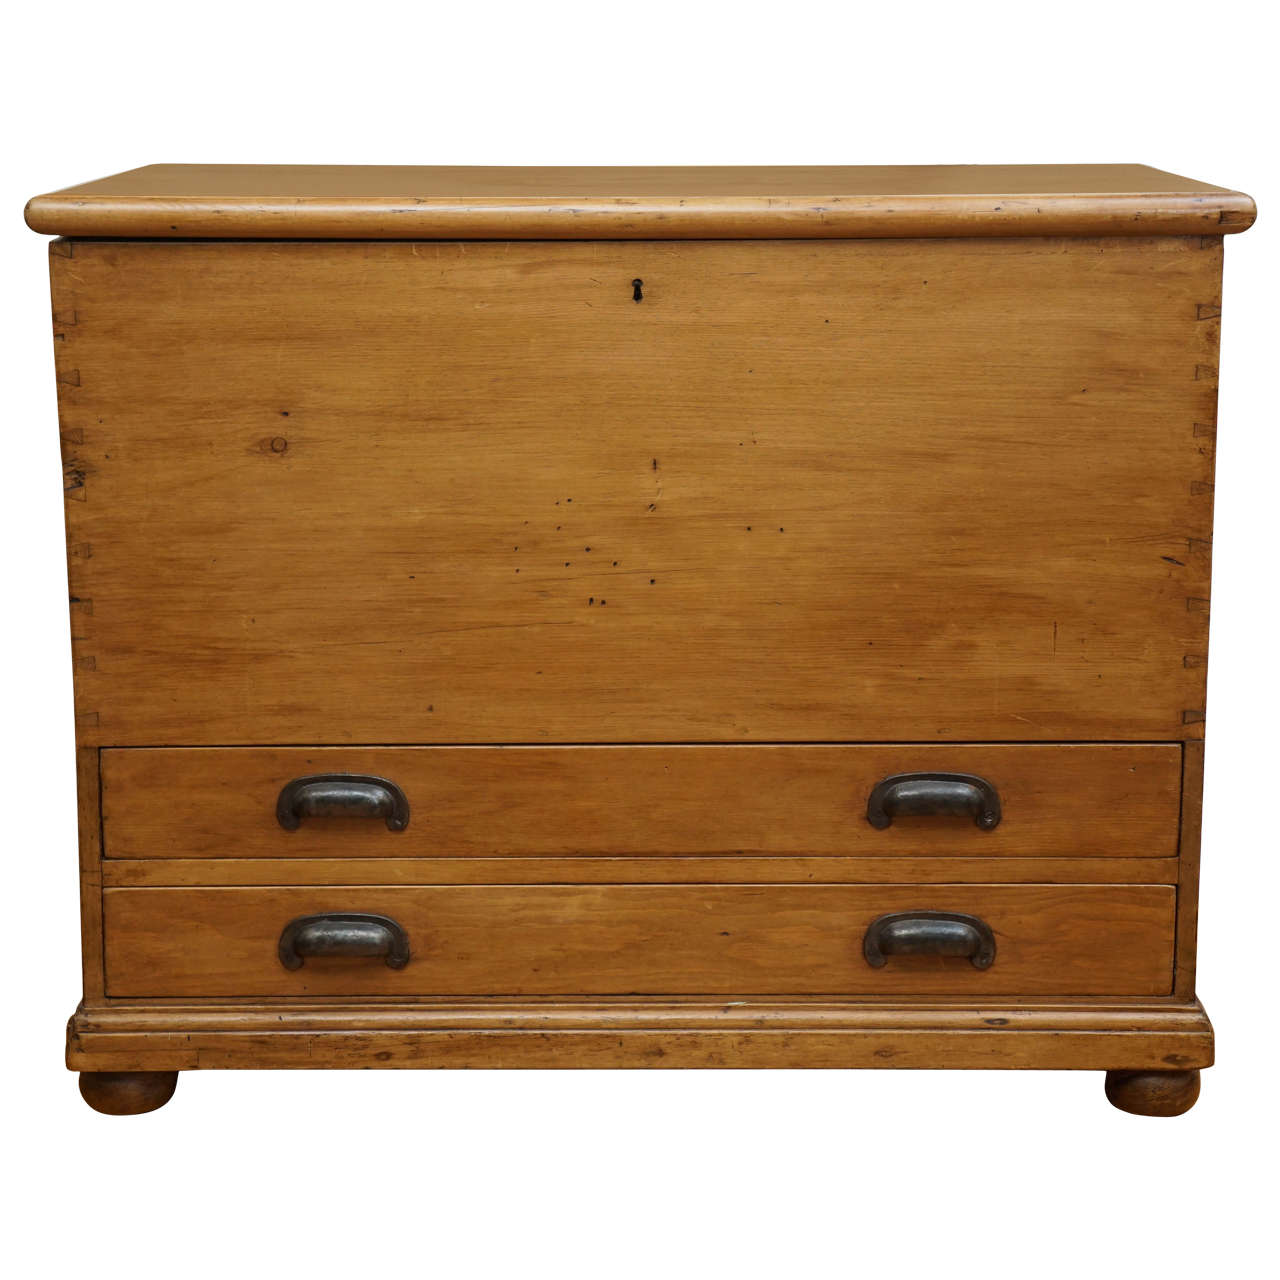 Mule Chest with Storage Lid and 2 Drawers